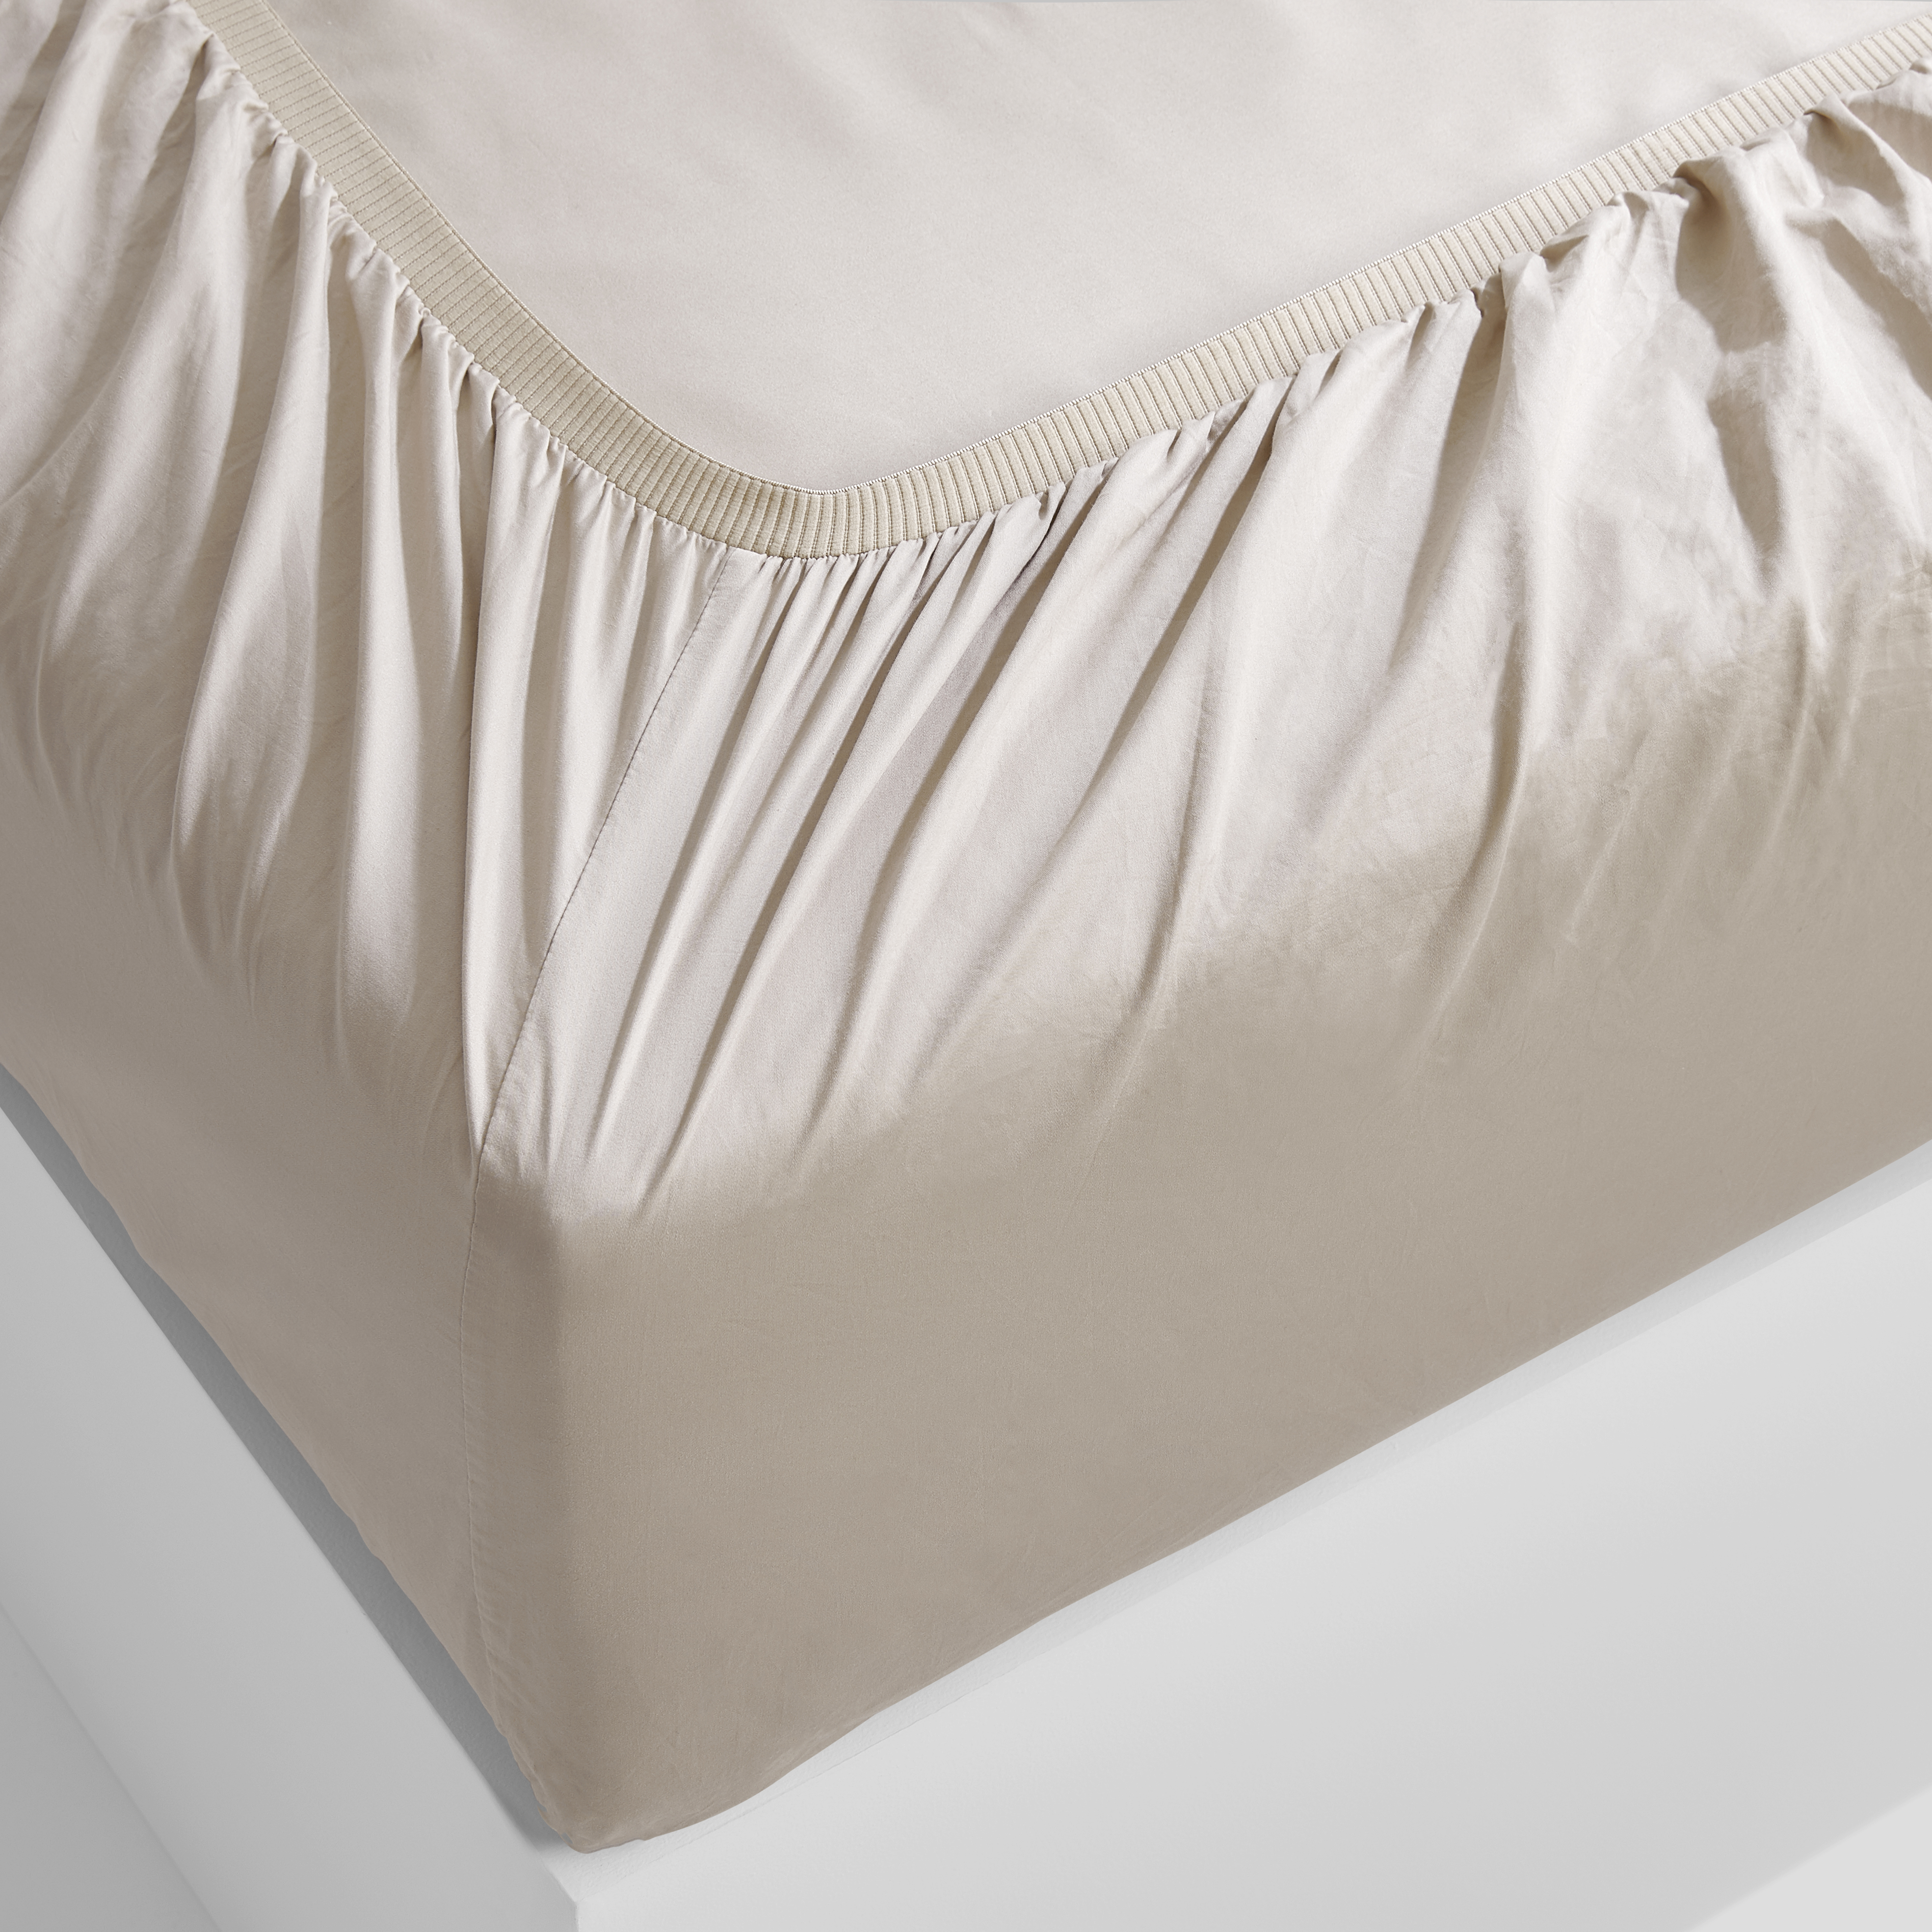 Joop Fitted Sheets/Fitted Sheet 140 x 200cm 18 COLOURS AVAILABLE NEW/OVP 